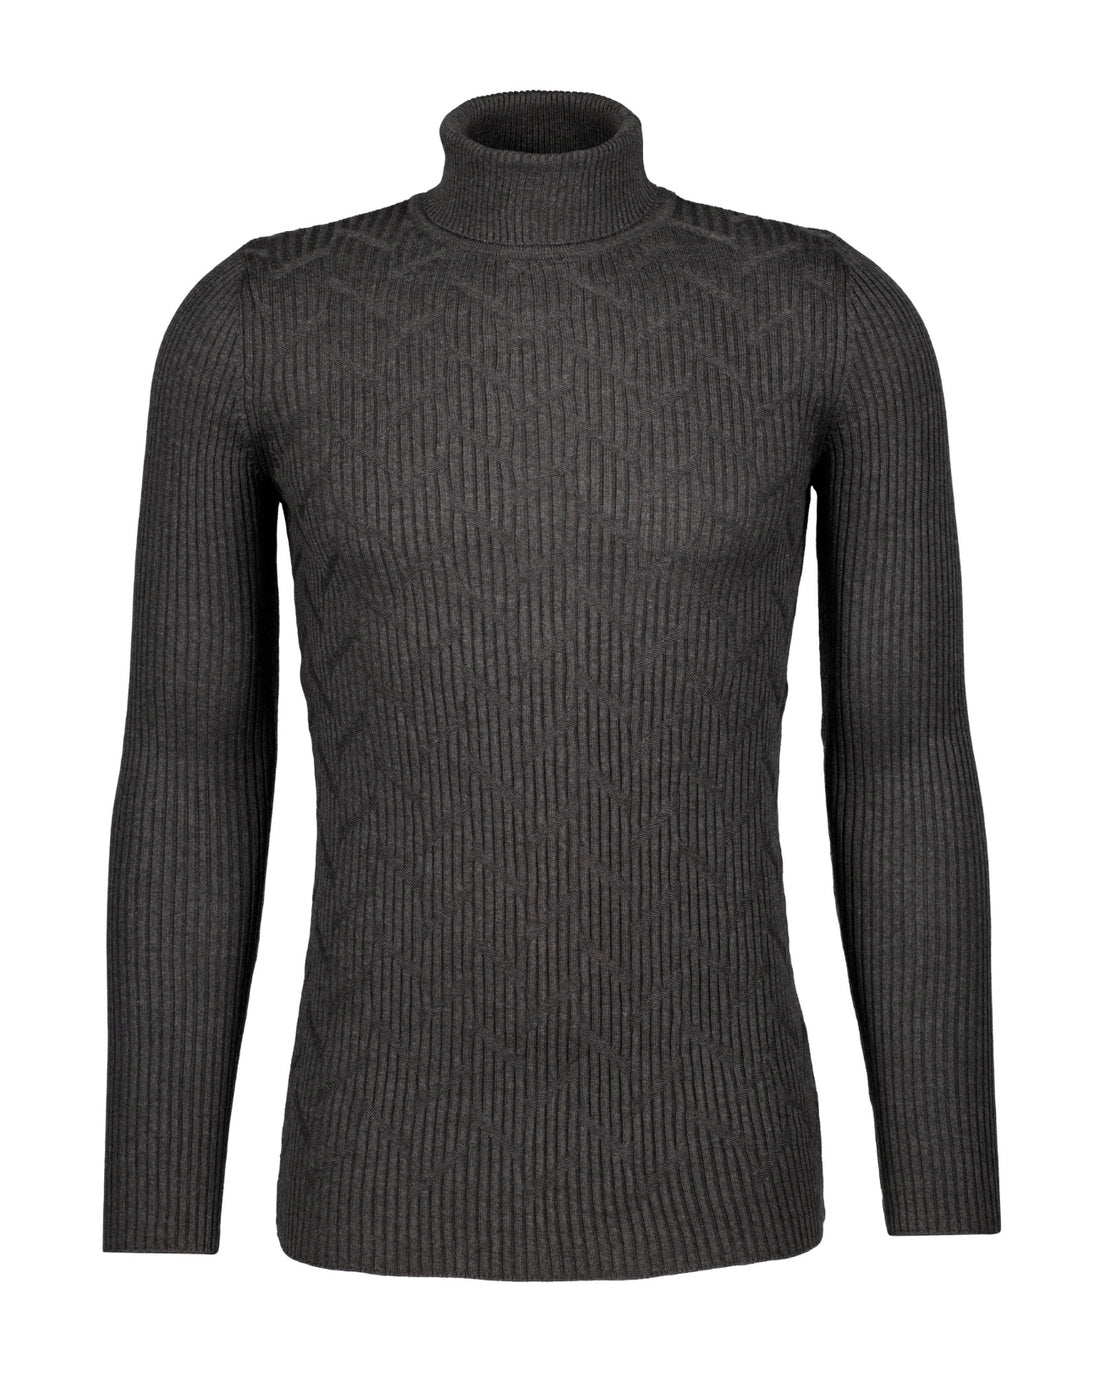 Abstract Knit Turtleneck Sweater -  Charcoal - Sweater by Urbbana